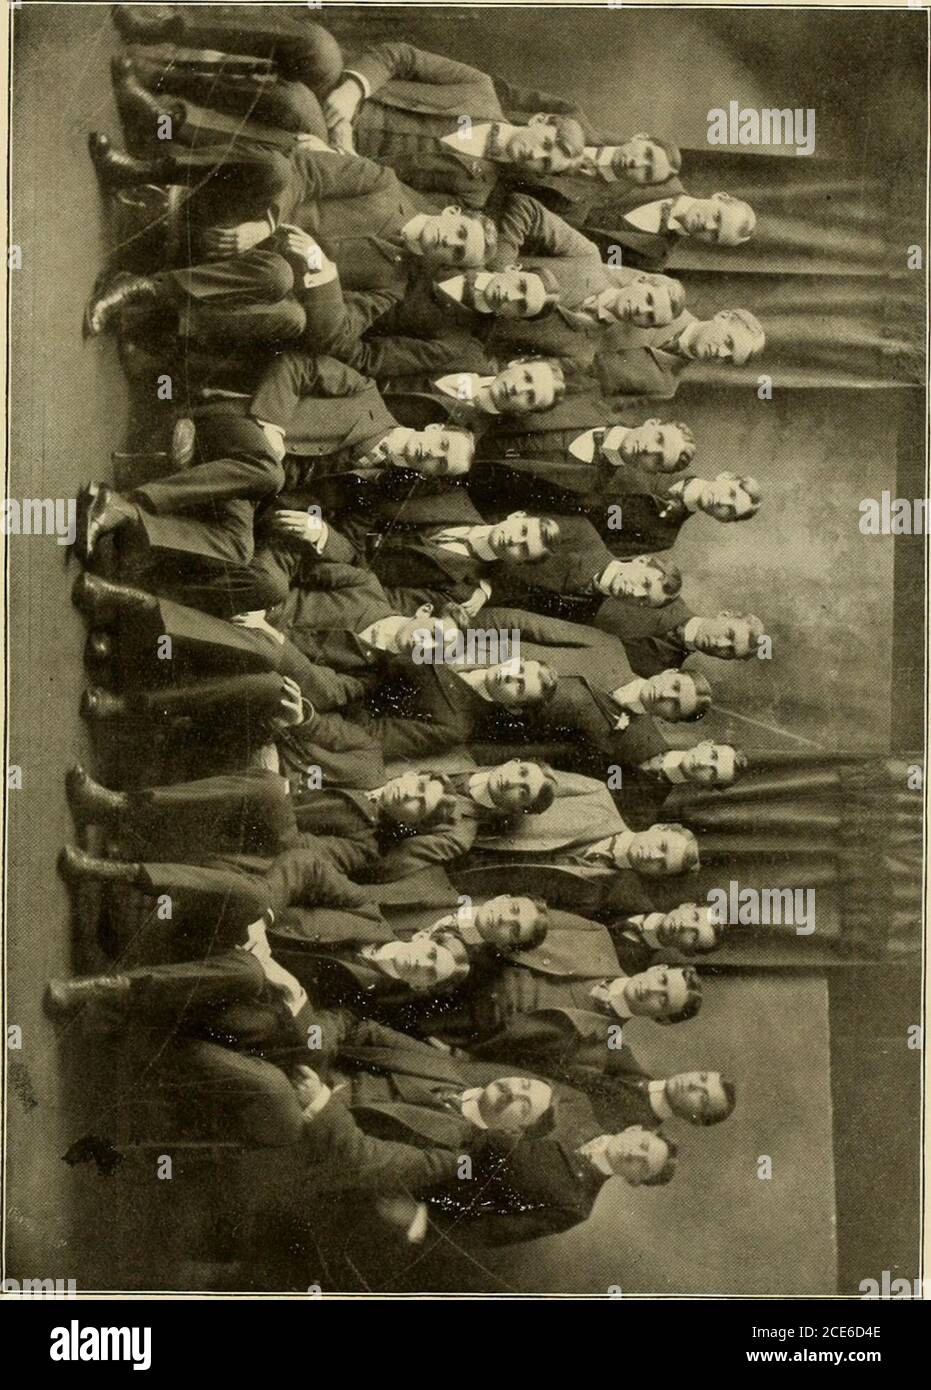 . The Monticola 1901 . Phi /igma Kappa. Delta Chapter. Establishef] l.-itl. Fratres in Facultaie. James H. Stewart, A.M.,EussELL Love Morris, C.E.Clement R. Jones, M.E.,Dennis M. Willis, LL. B., DiiectOL of ExperimentStation. Instructor in Civil Engineering. Instructor in Mechanical Engineering. - Principal of Commercial School. Fratres inUrbe.Edgar Stewart, LL. B.. ..- ... Lawyer. Arthur L. Boyers, D.D.S.. Dentist. James C. Frazer. LL. B.. Lawyer. Charles E. McCoy, C.E., - - - - - Civil Engineer. Guy Willey, Electrician. Fratres in Universitate. Edward B. Carskadon, LL. B., 99.Howard Mason Go Stock Photo